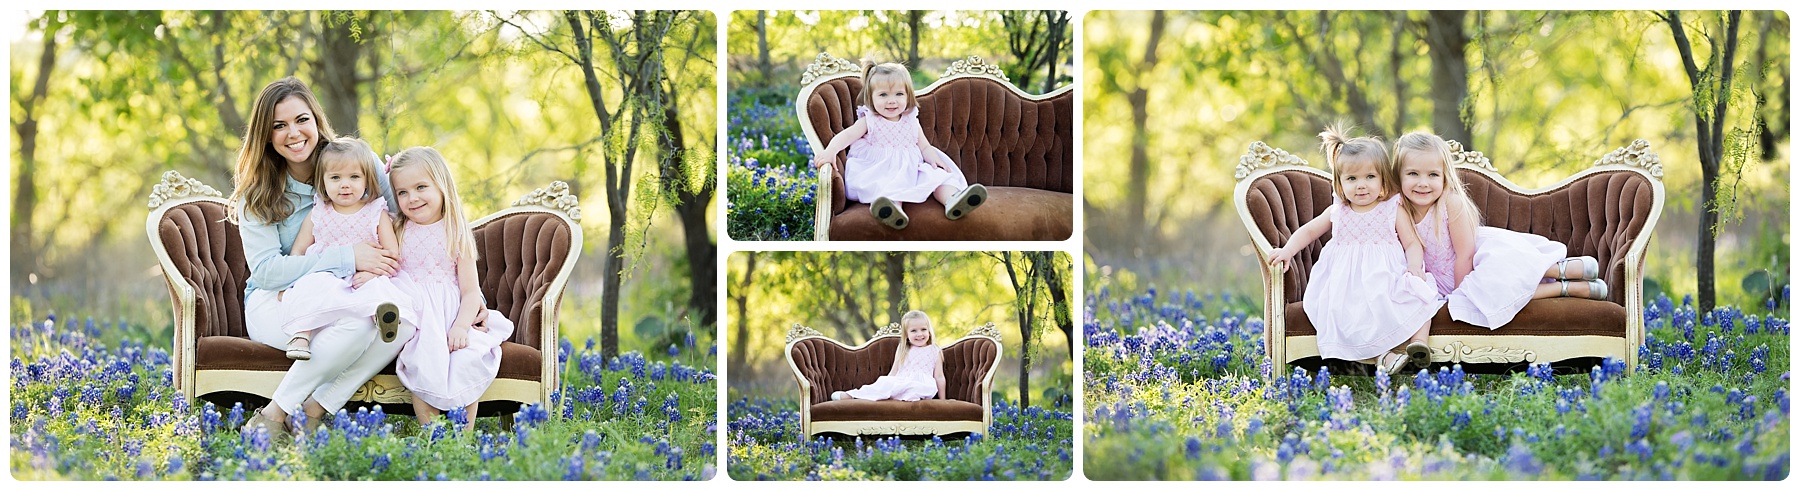 little girls sitting on a couch in the bluebonnets